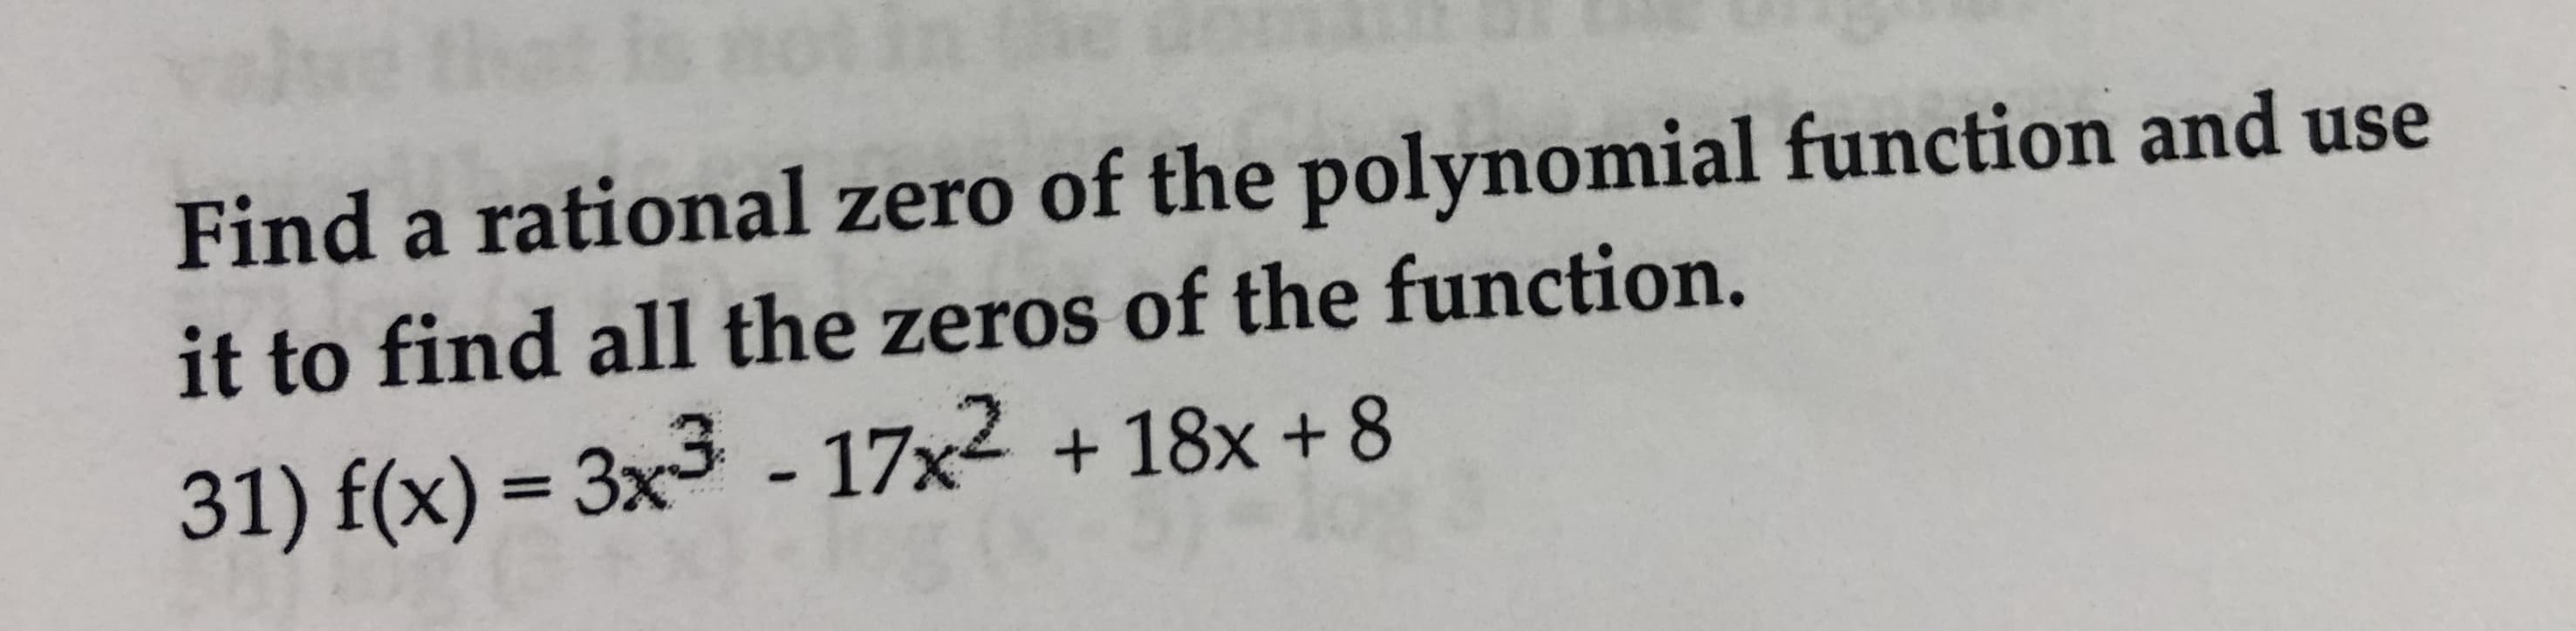 Find a rational zero of the polynomial function and use
it to find all the zeros of the function.
31) f(x)-3x3 - 17x2 + 18x +8
